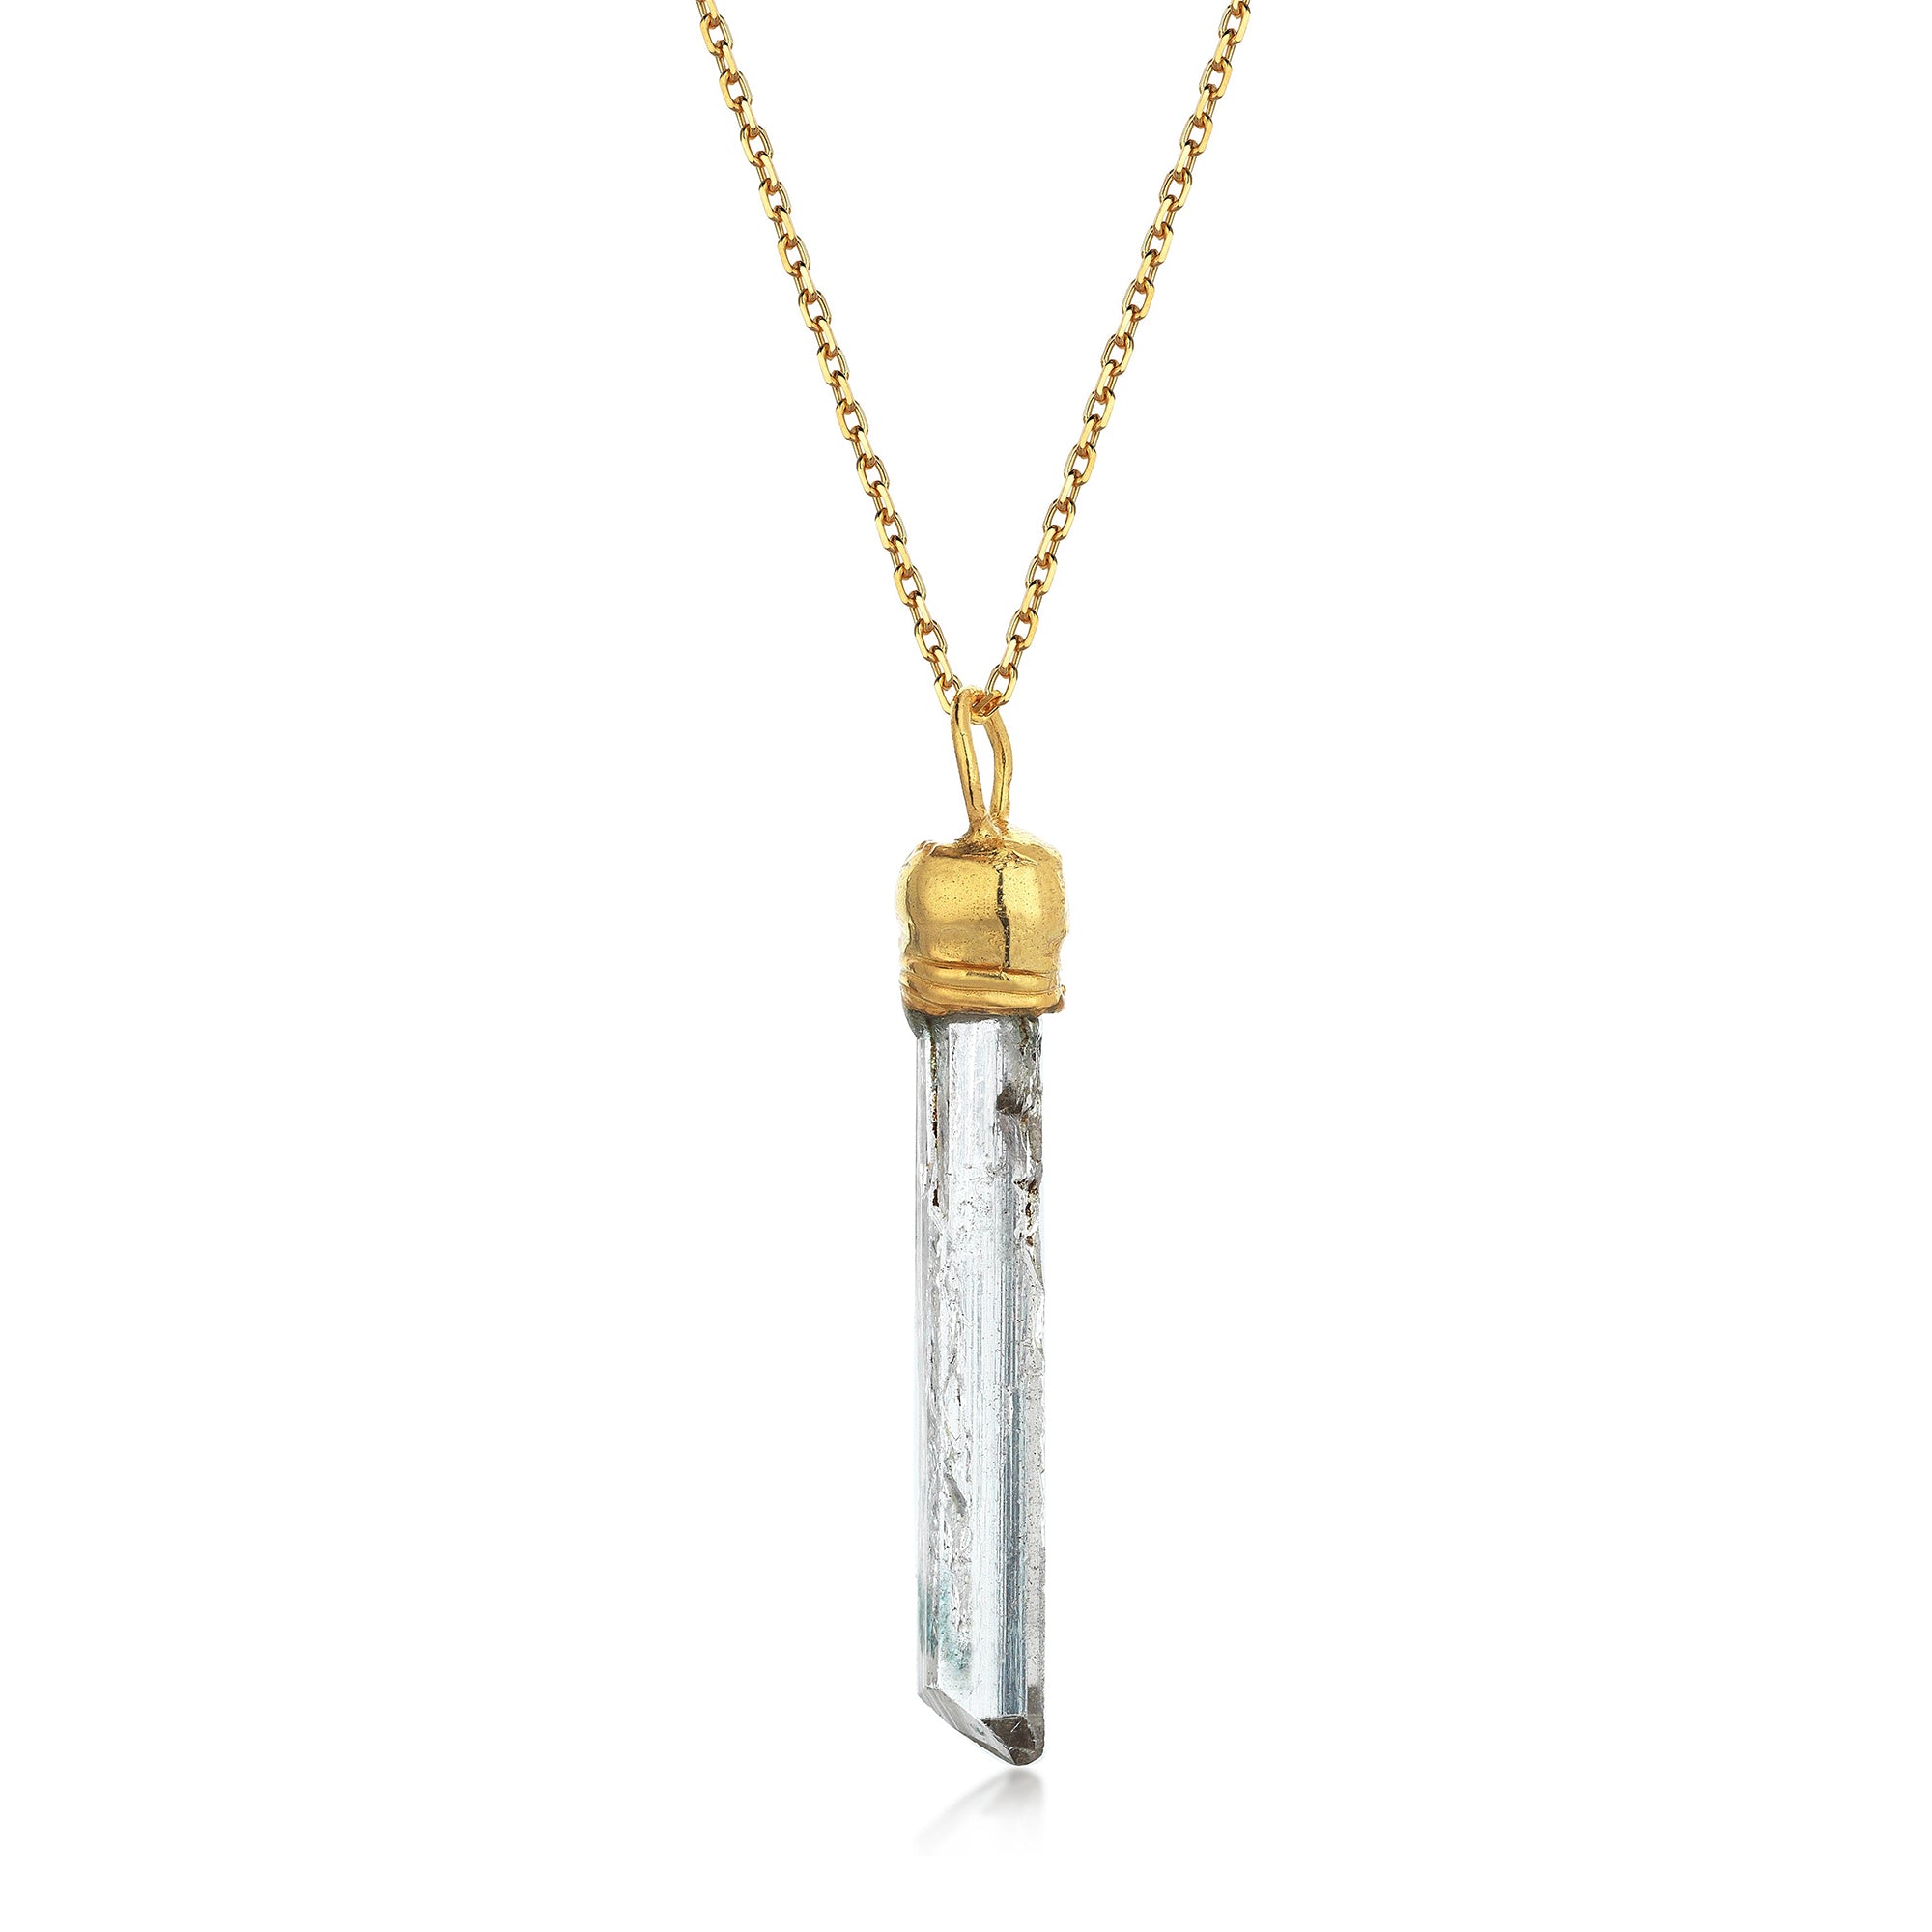 THE CRYSTAL BLADE NECKLACE